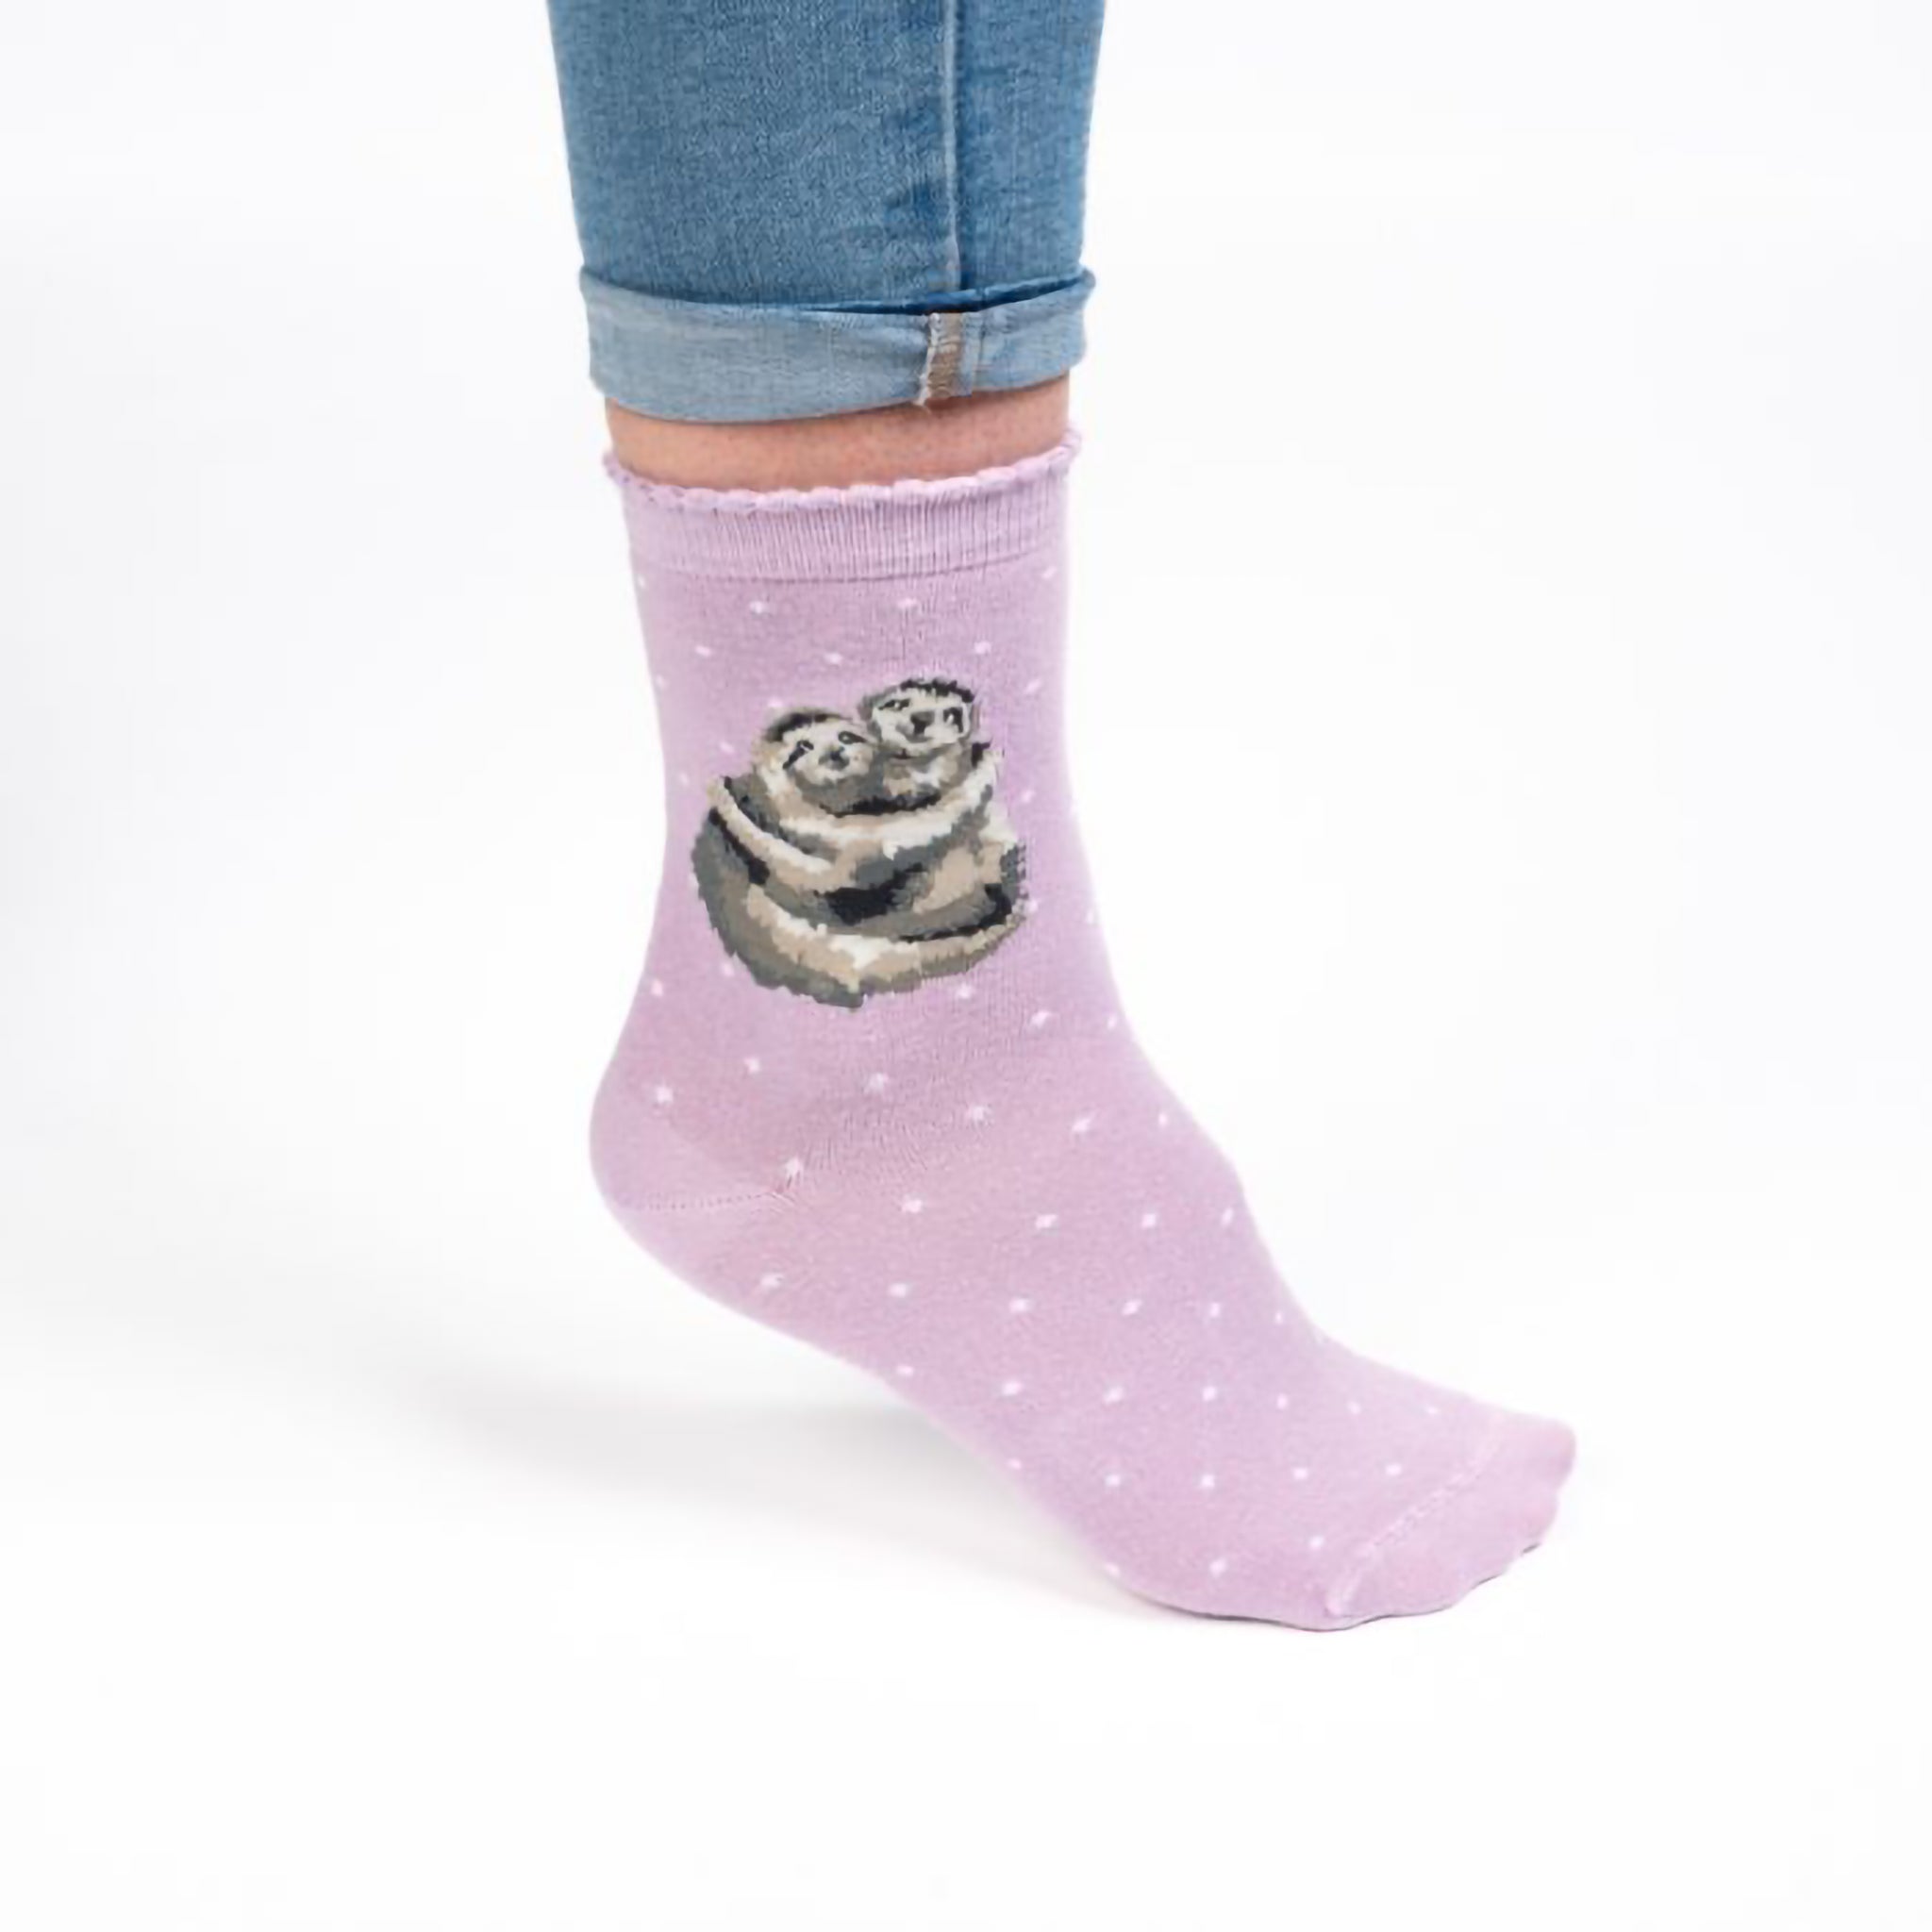 Model wearing a pair of purple socks with a picture of two cuddling sloths and white polka dots